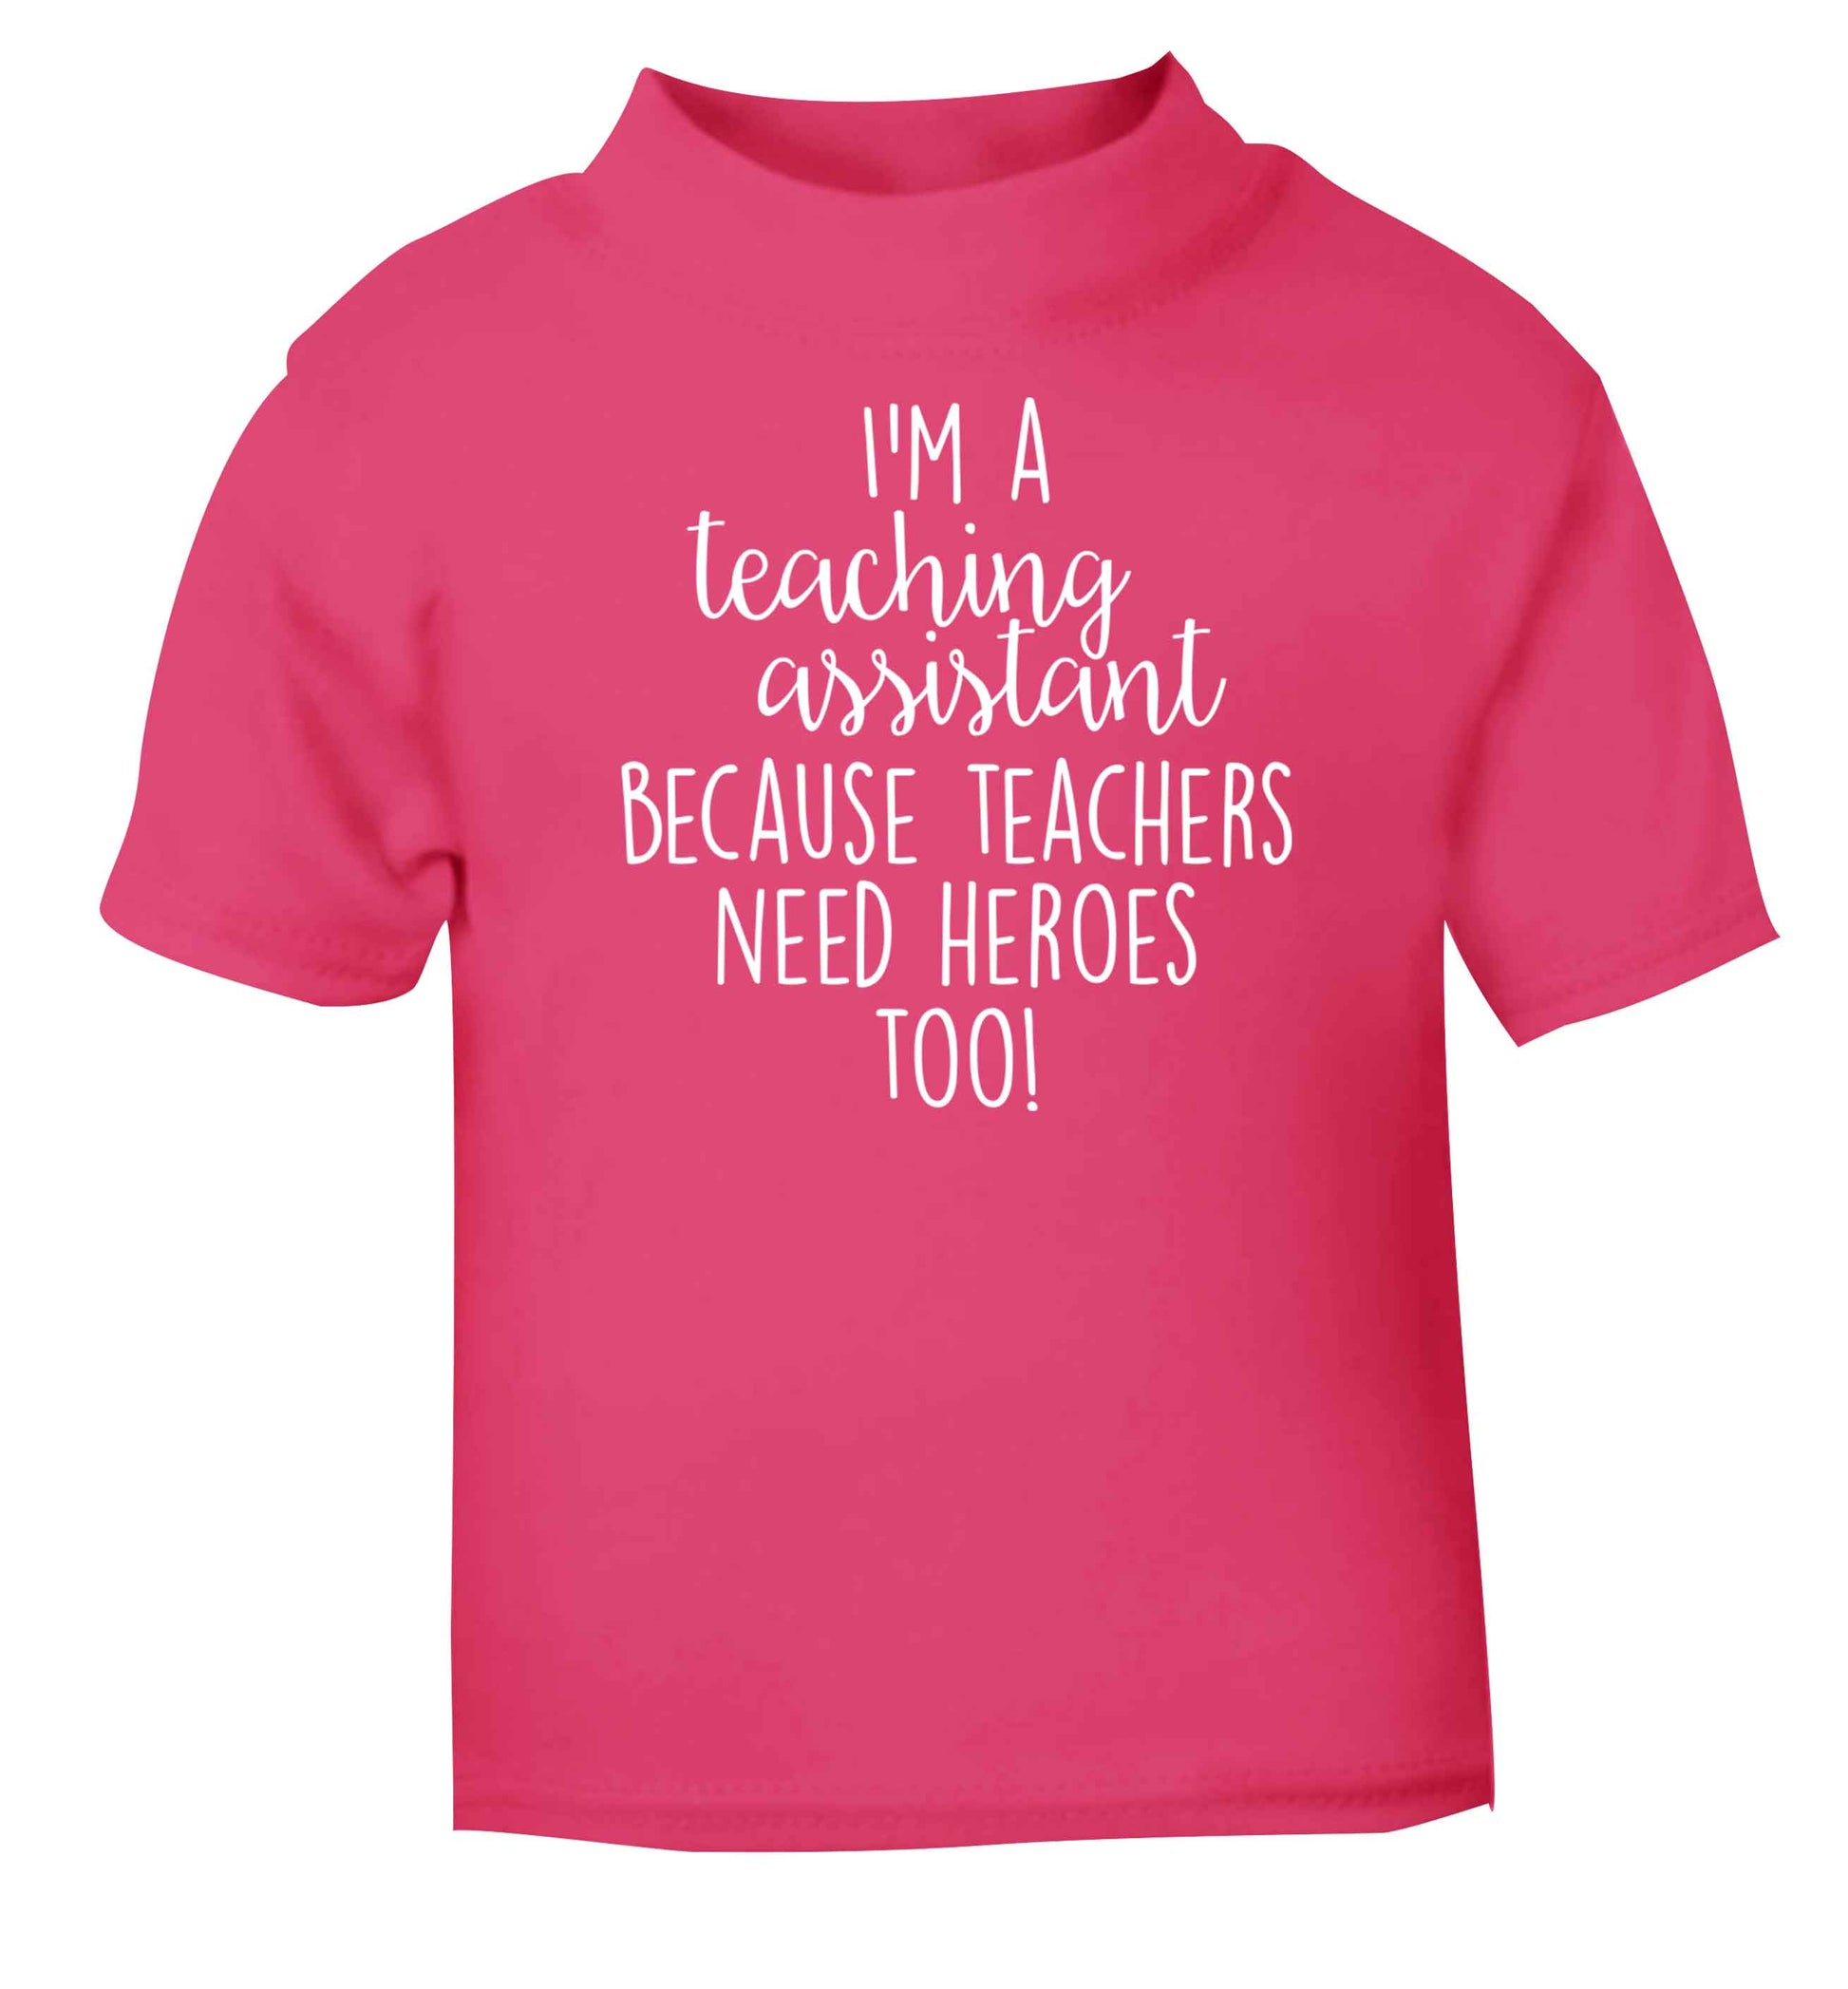 I'm a teaching assistant because teachers need heroes too! pink baby toddler Tshirt 2 Years